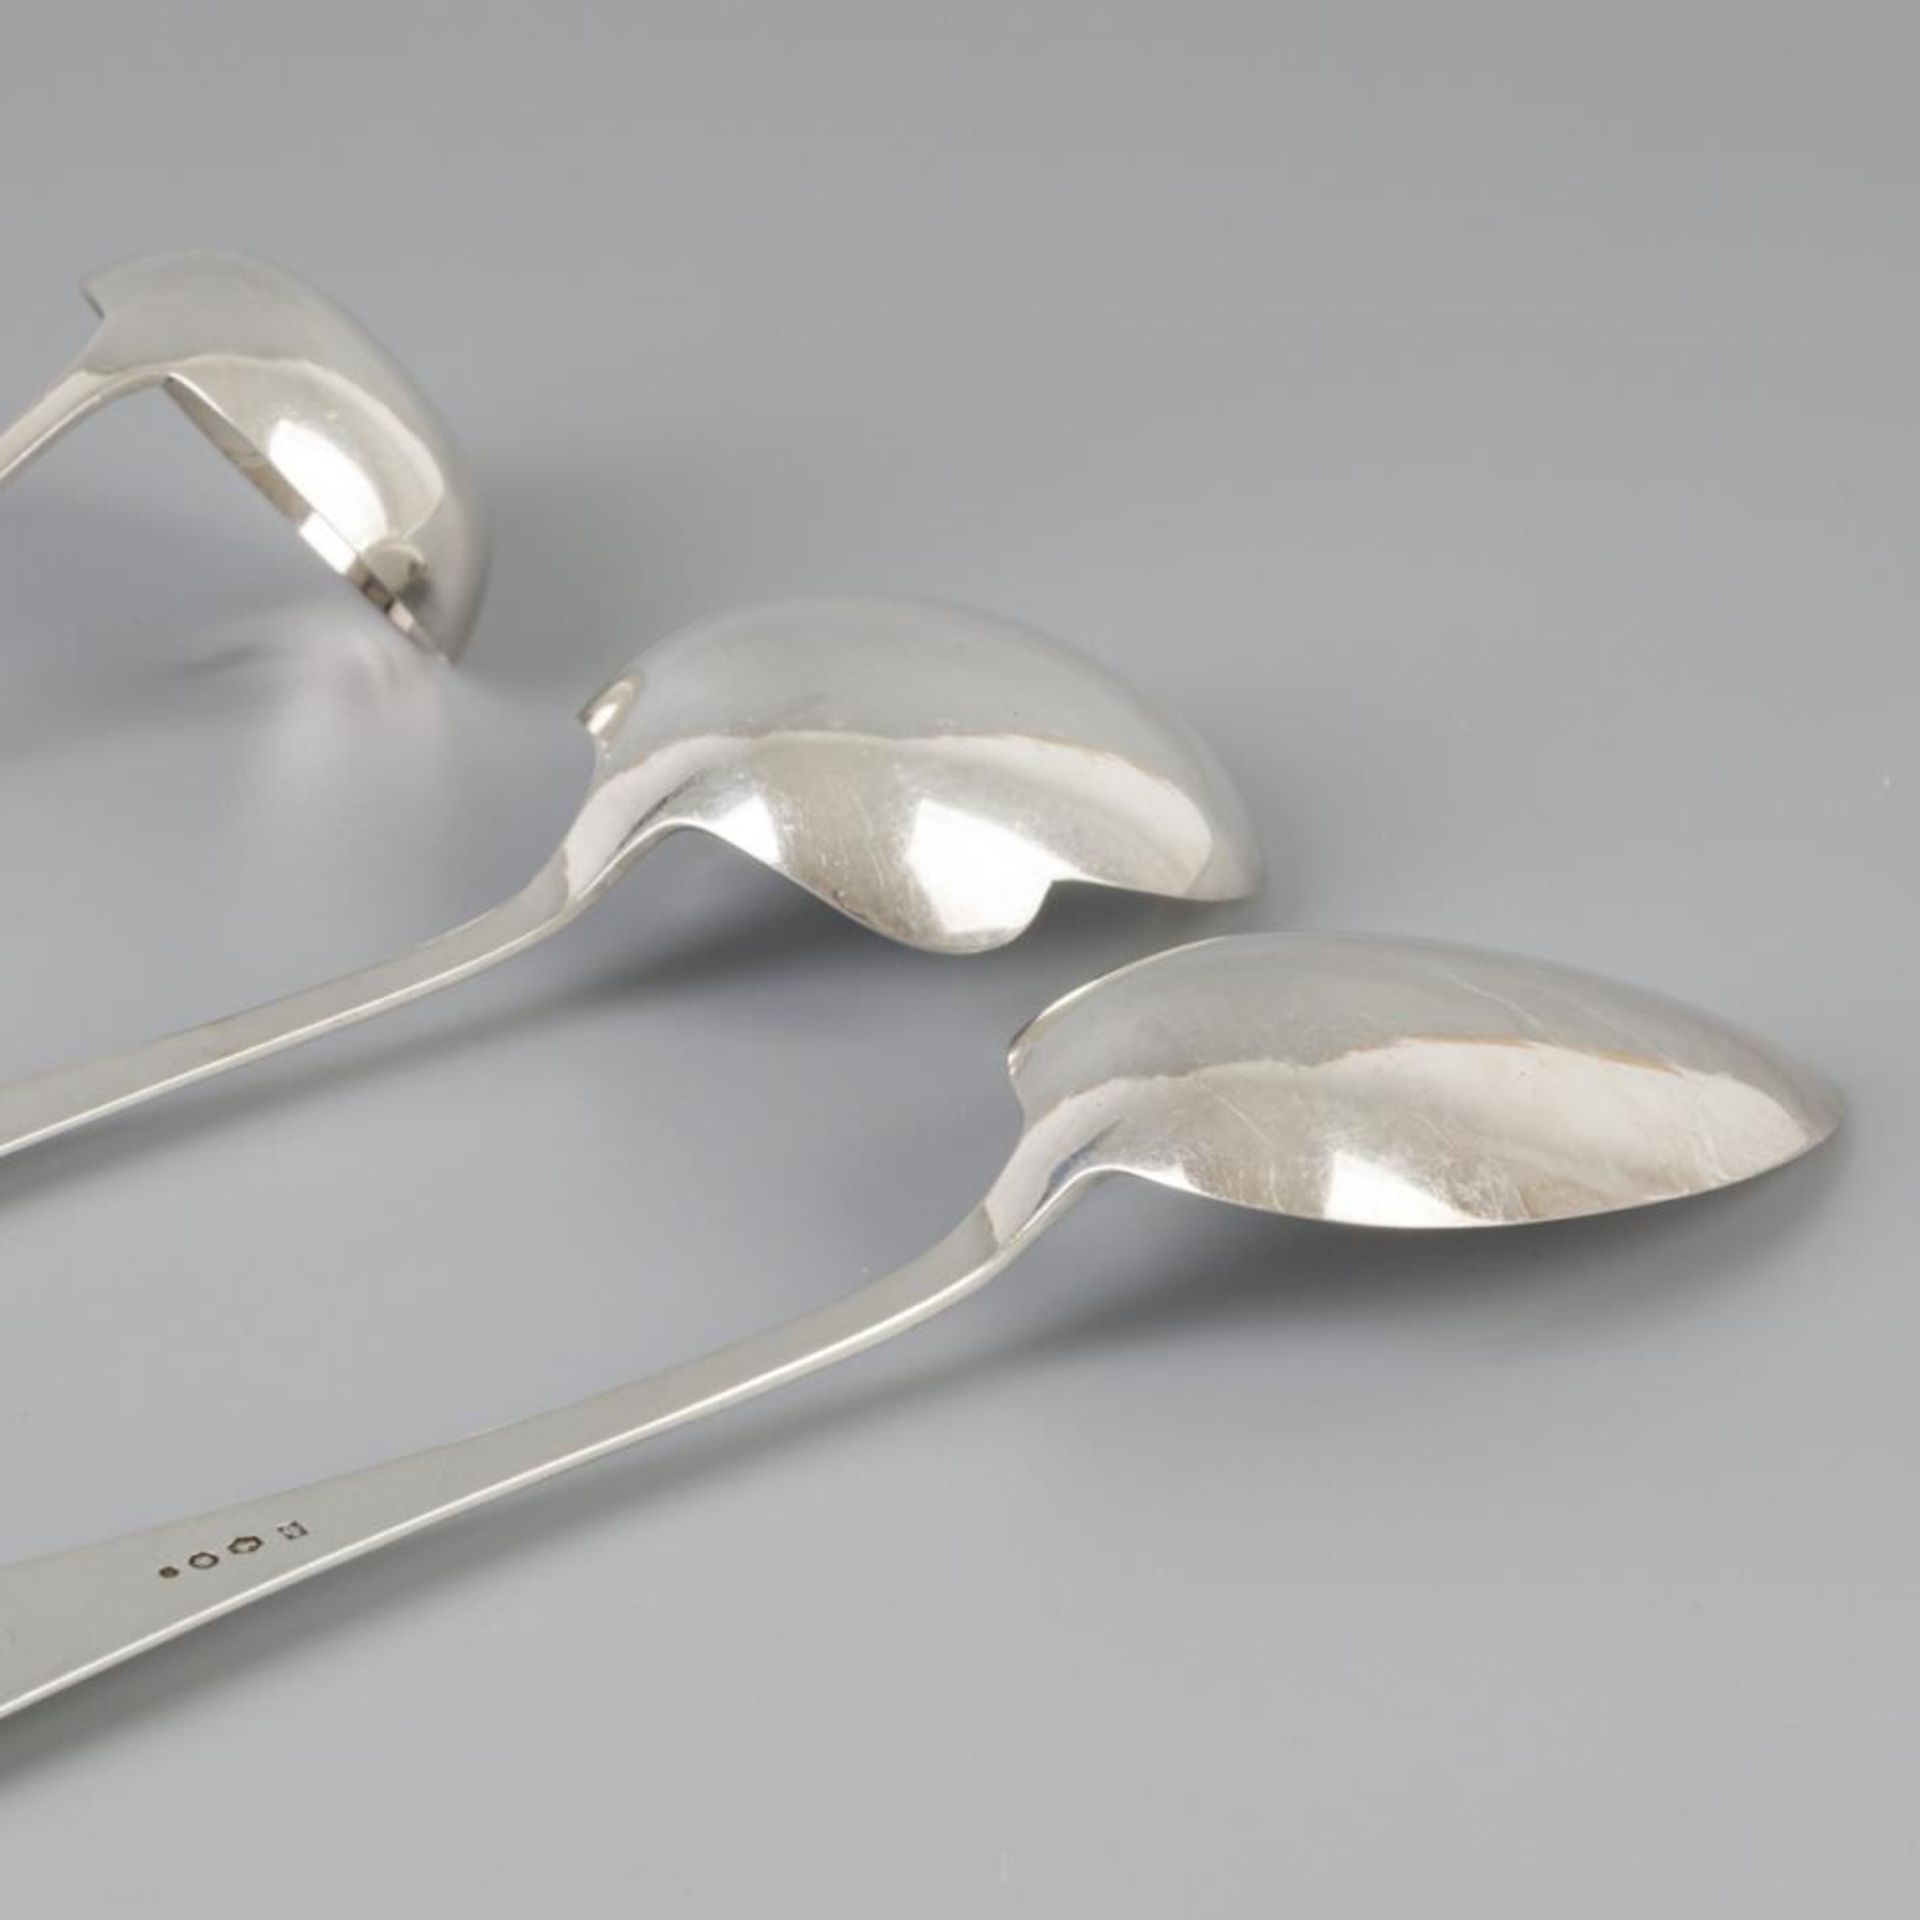 3 piece set of ladles "Haags Lofje" silver. - Image 4 of 7